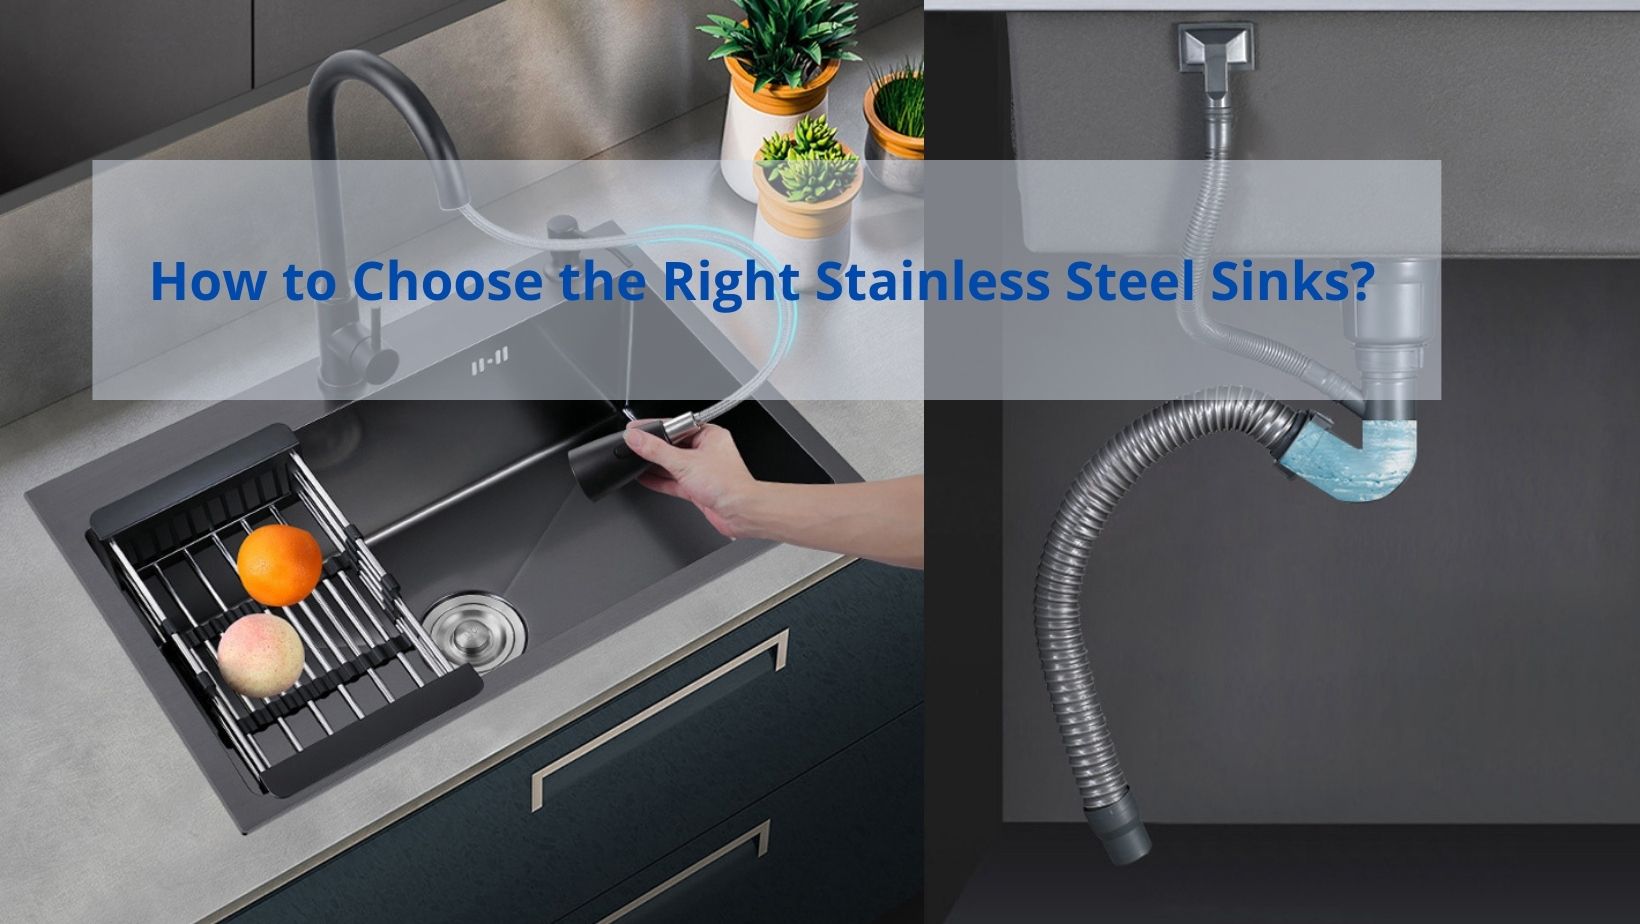 How to Choose the Right Stainless Steel Sinks